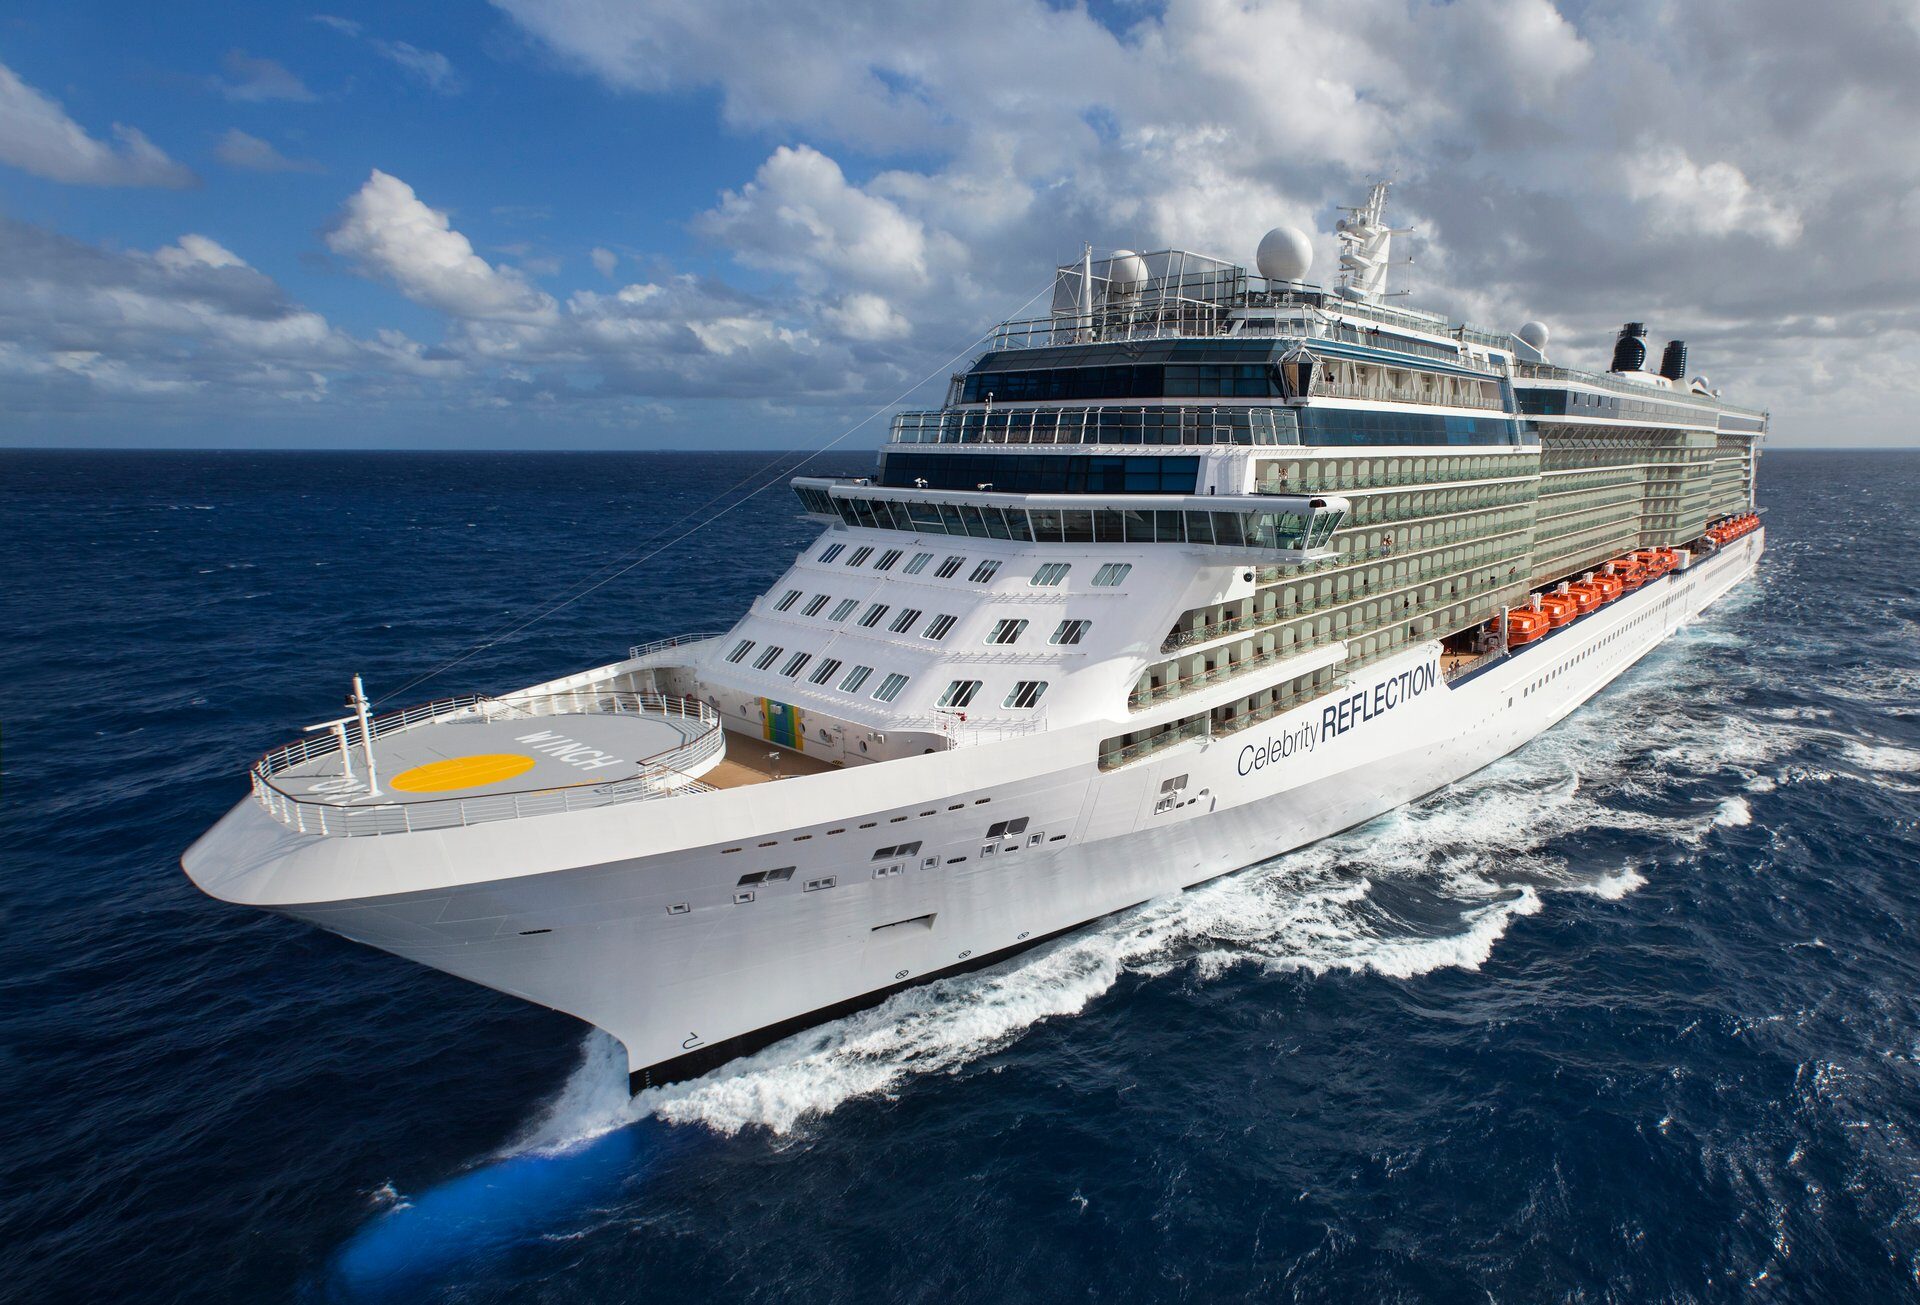 Port vs. Starboard: Which Is Best for Your Cruise Room?